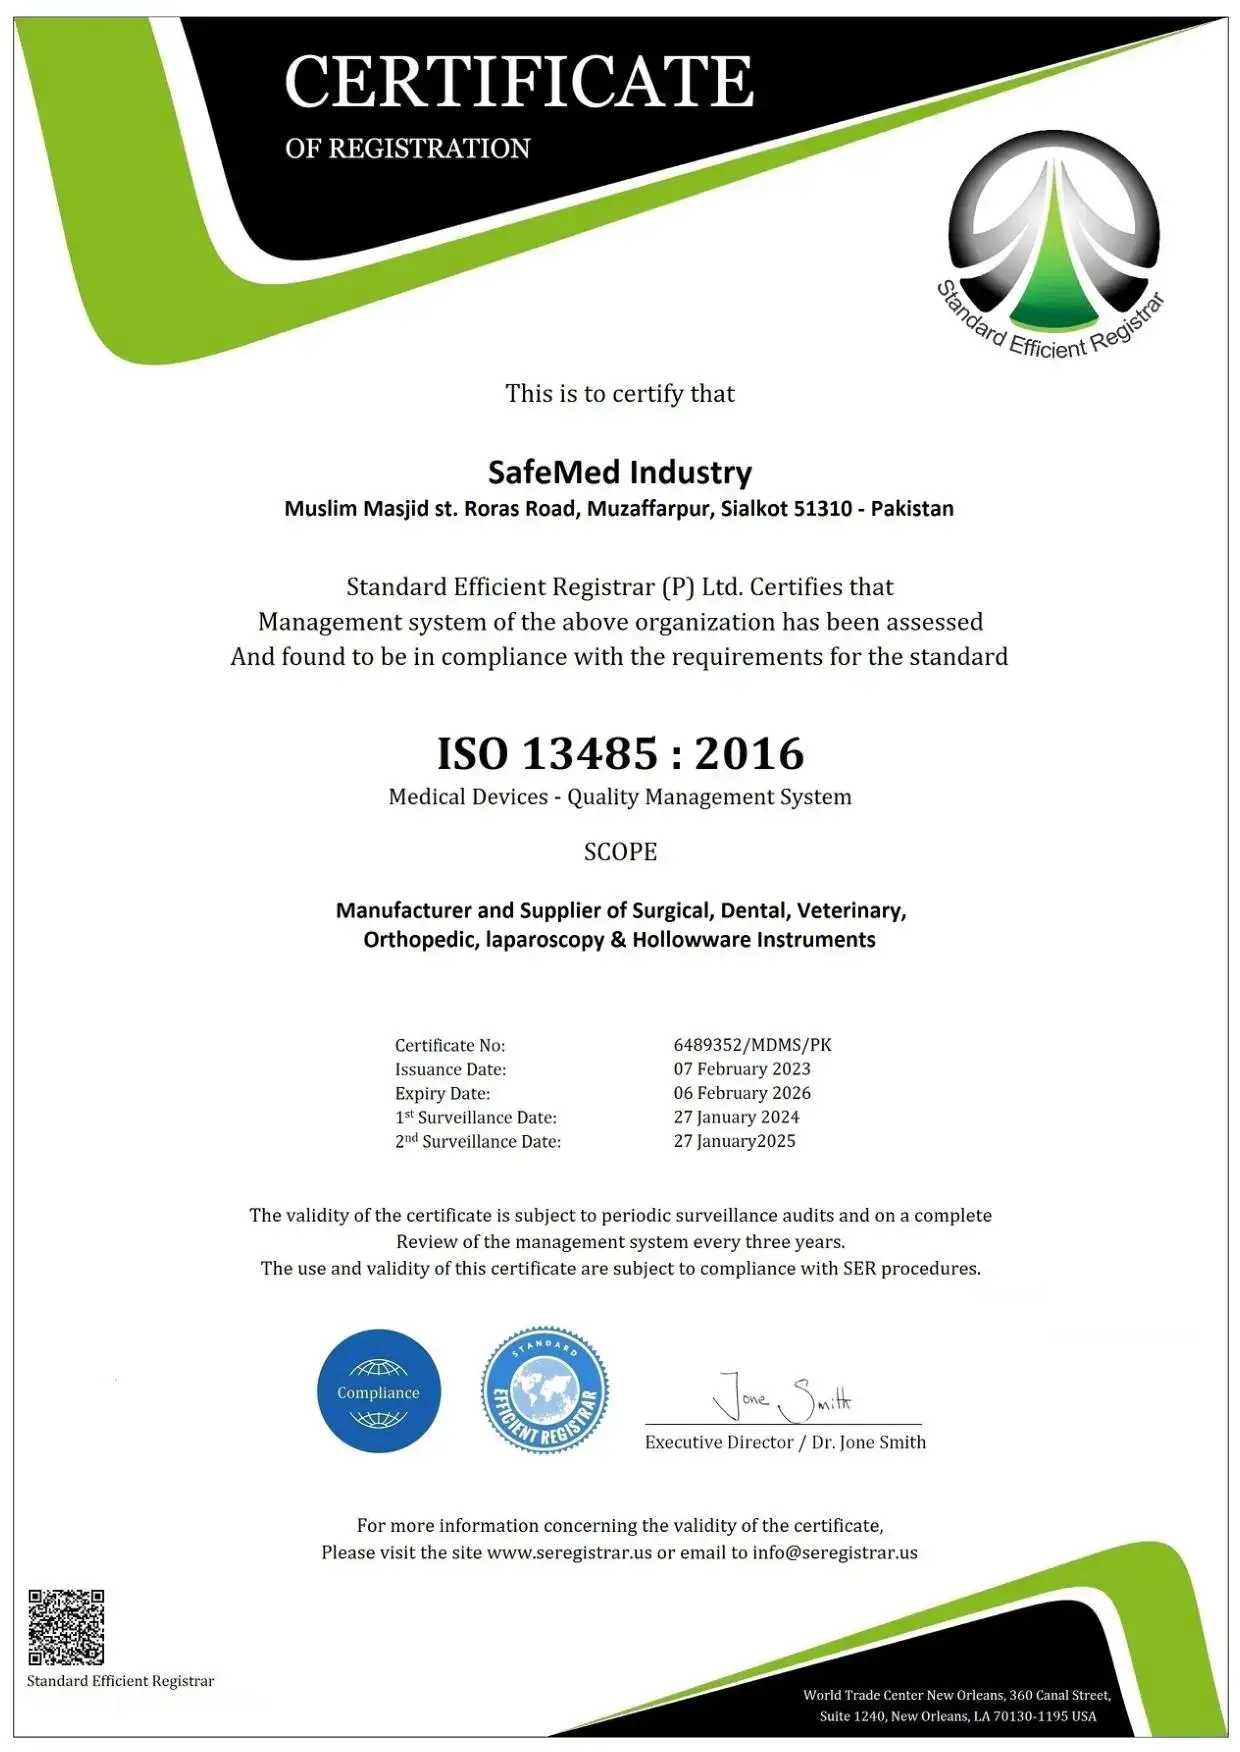 ISO 13485 : 2016 Certificate